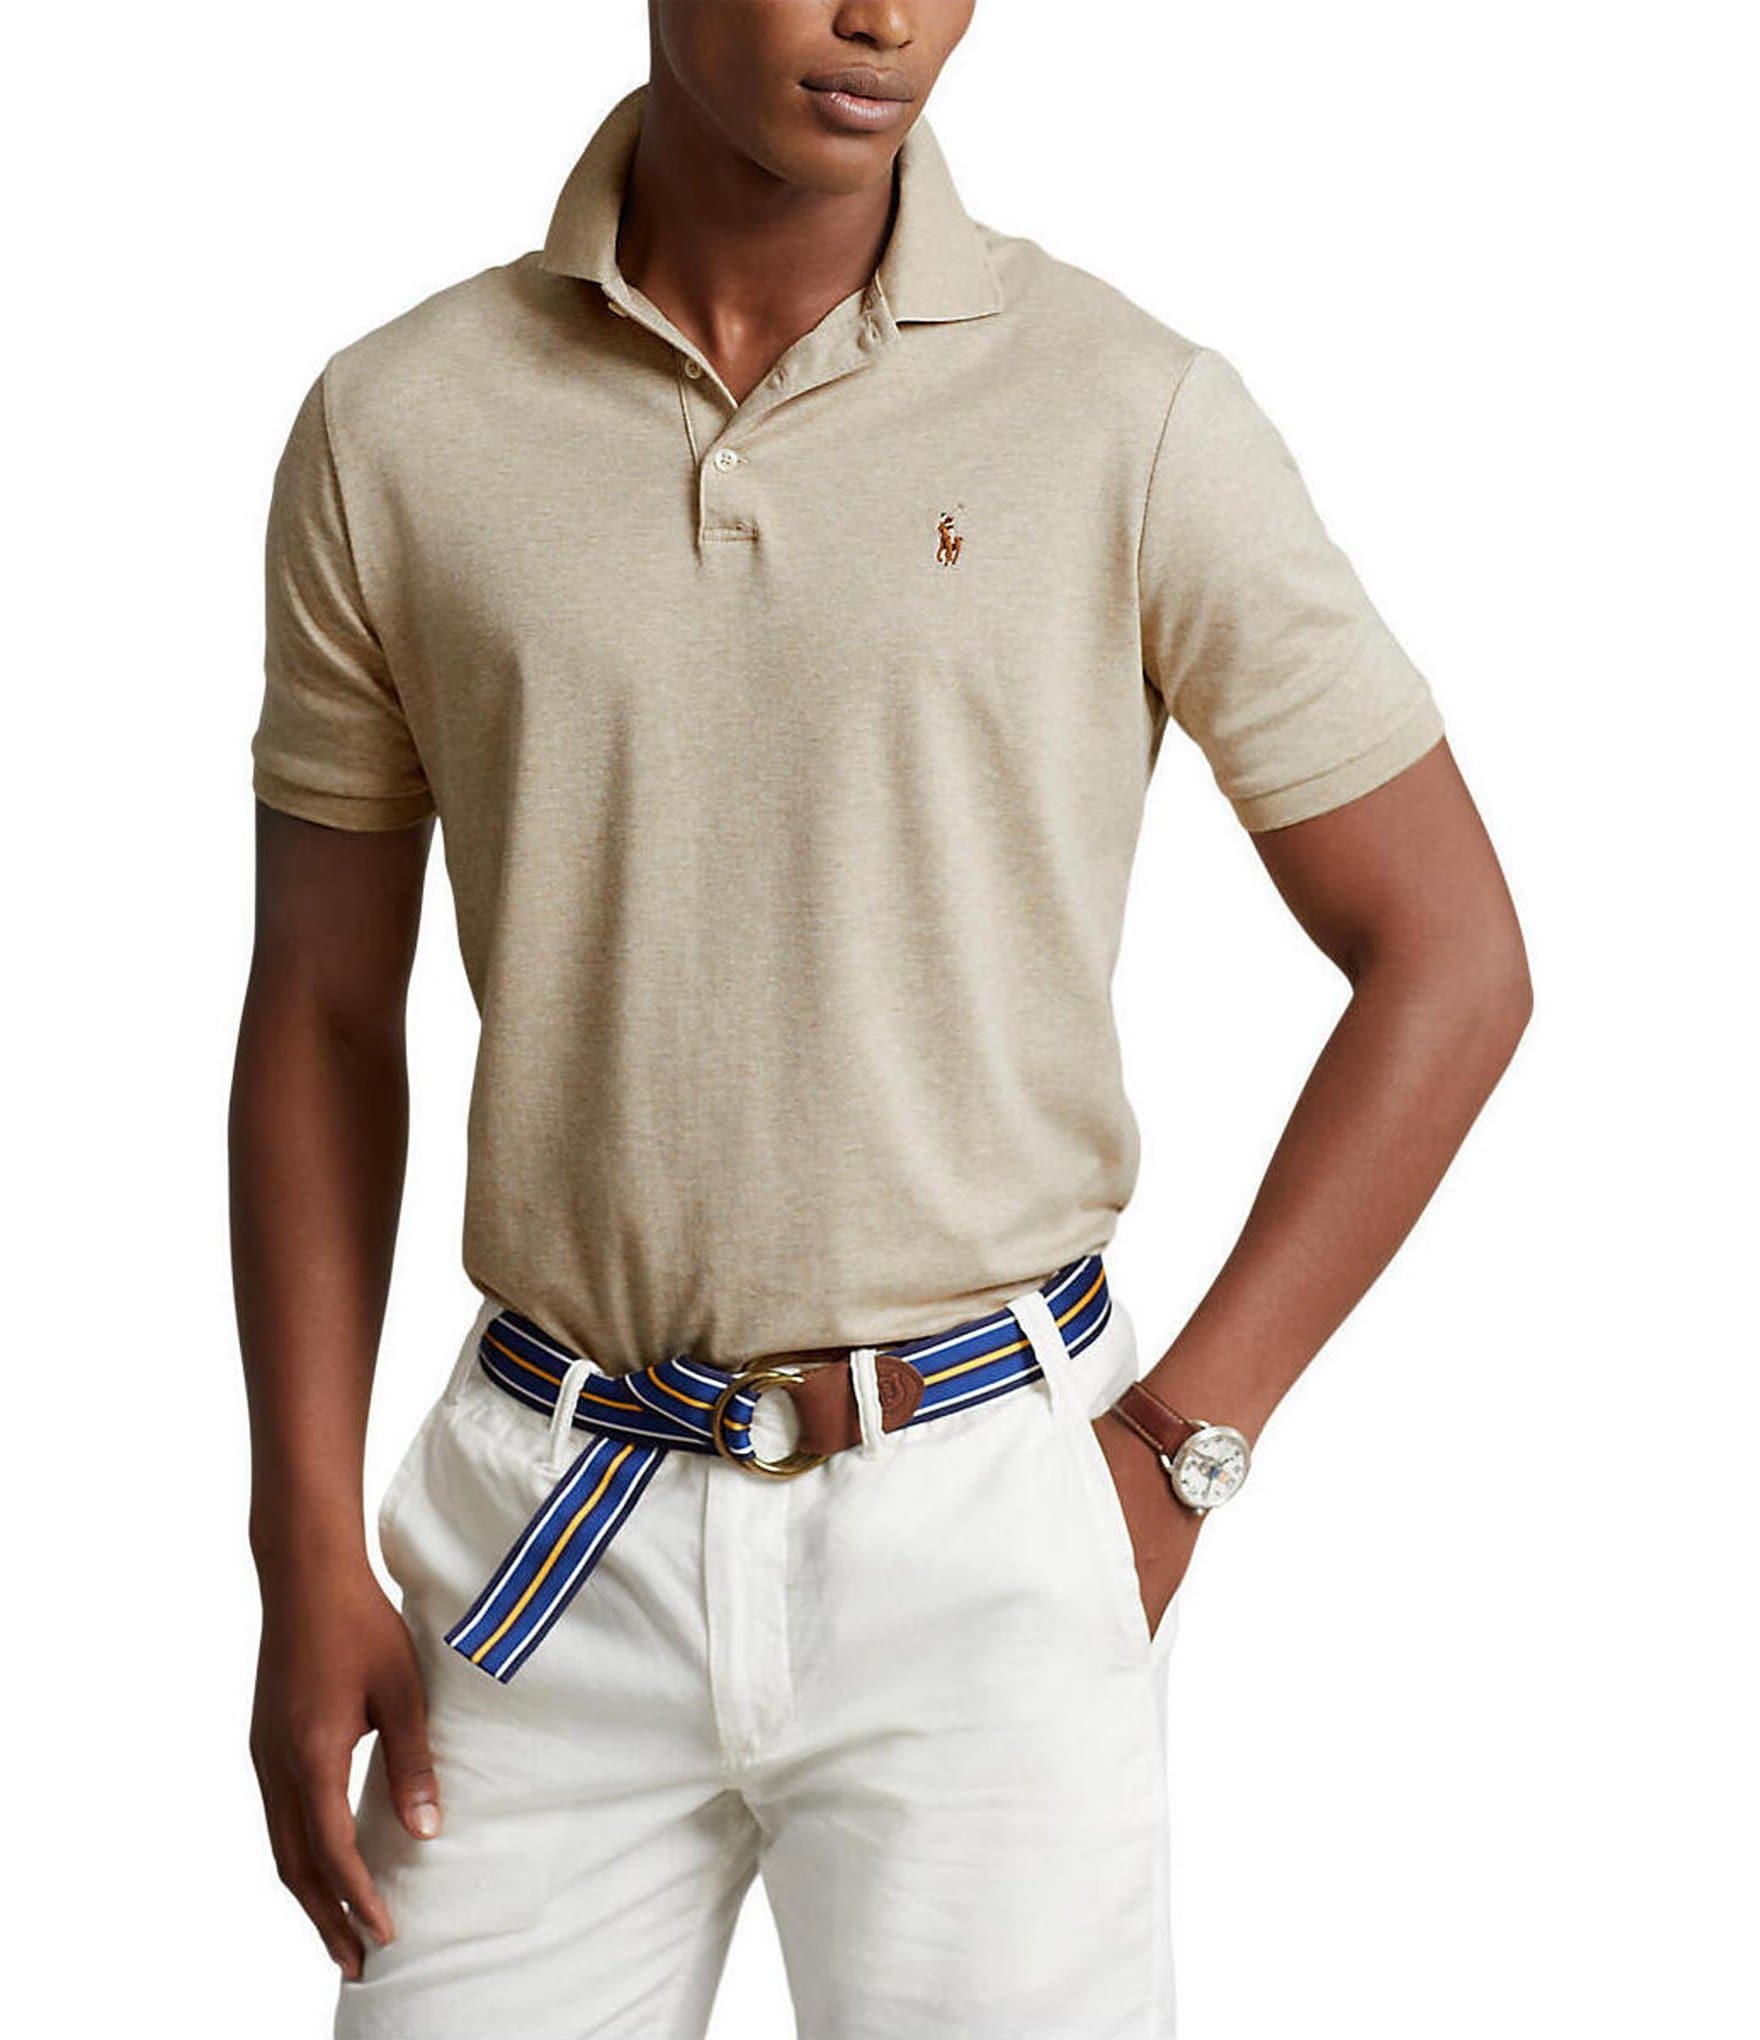 soft on: Men's Casual Polo Shirts